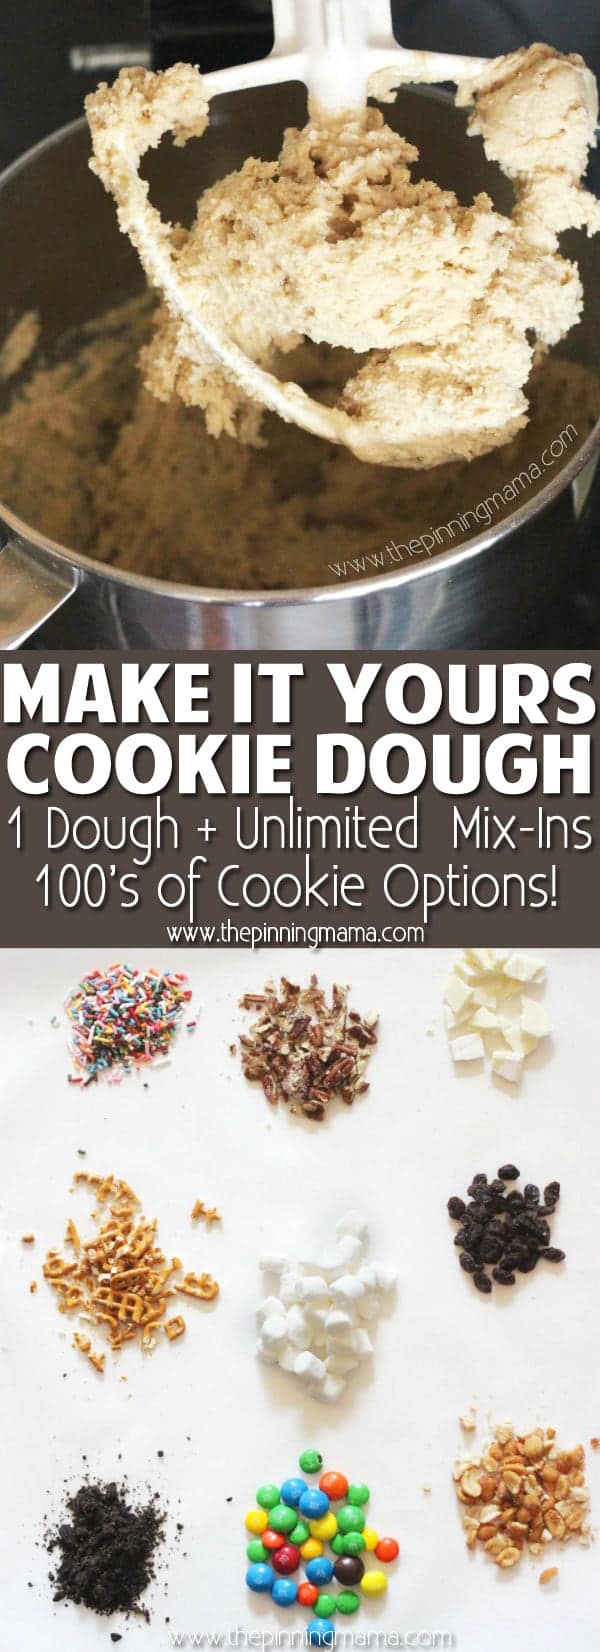 Add any mix-ins to this basic cookie dough recipe to make any flavor cookies your family loves! I usually split the dough in half or thirds and make different flavors each of my kids pick in just minutes. Such a fun way for kids to be creative in the kitchen!